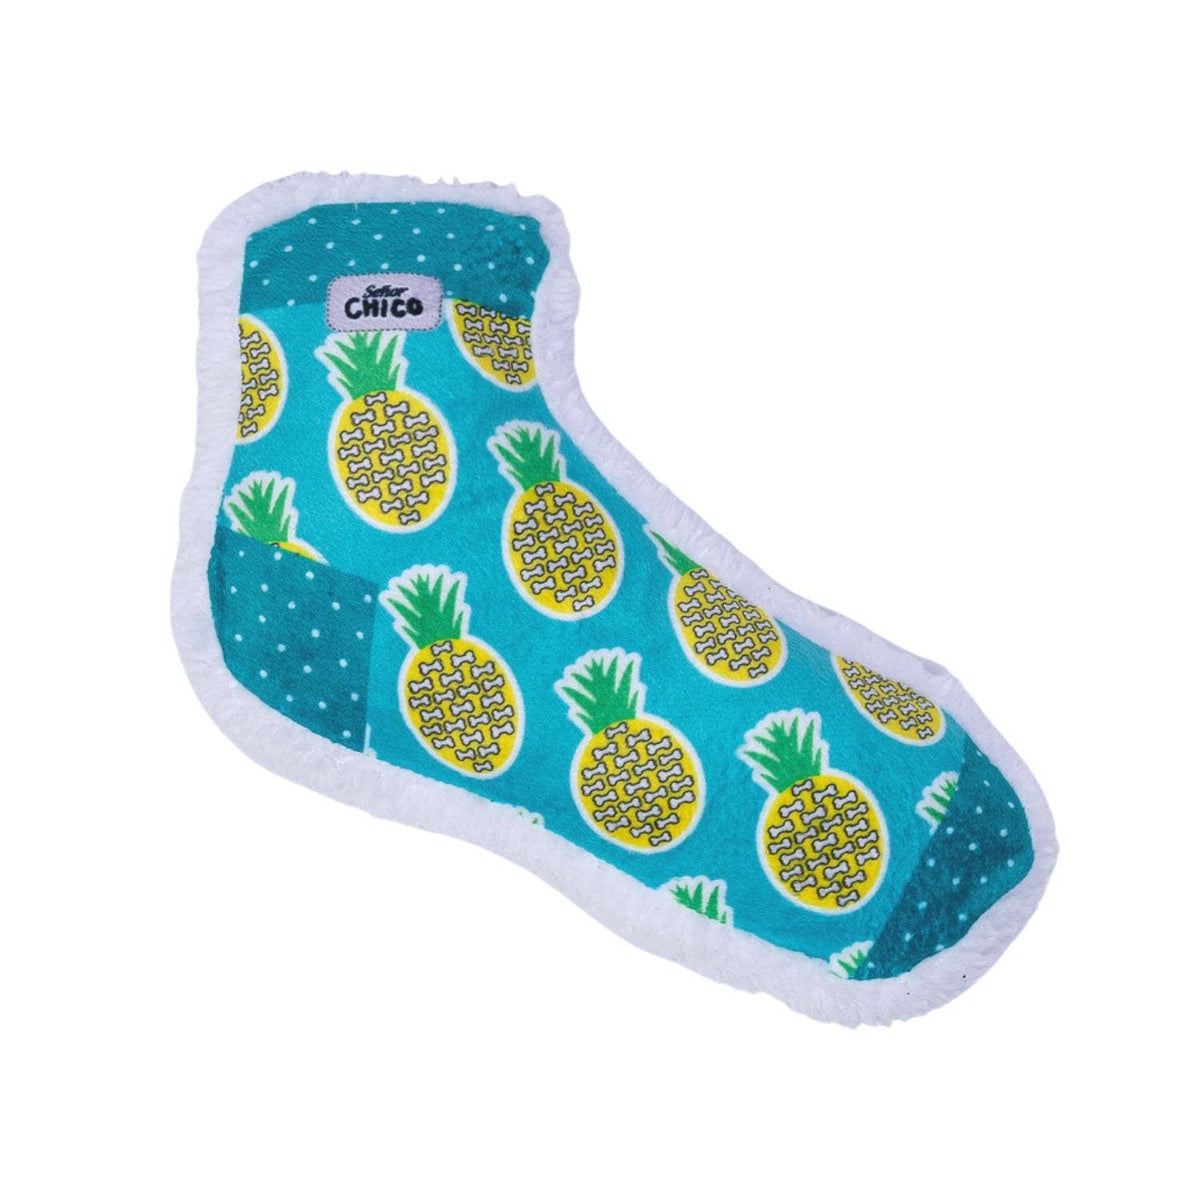 Squeaking Pineapple Comfort Plush Sock Dog Toy by American Pet Supplies